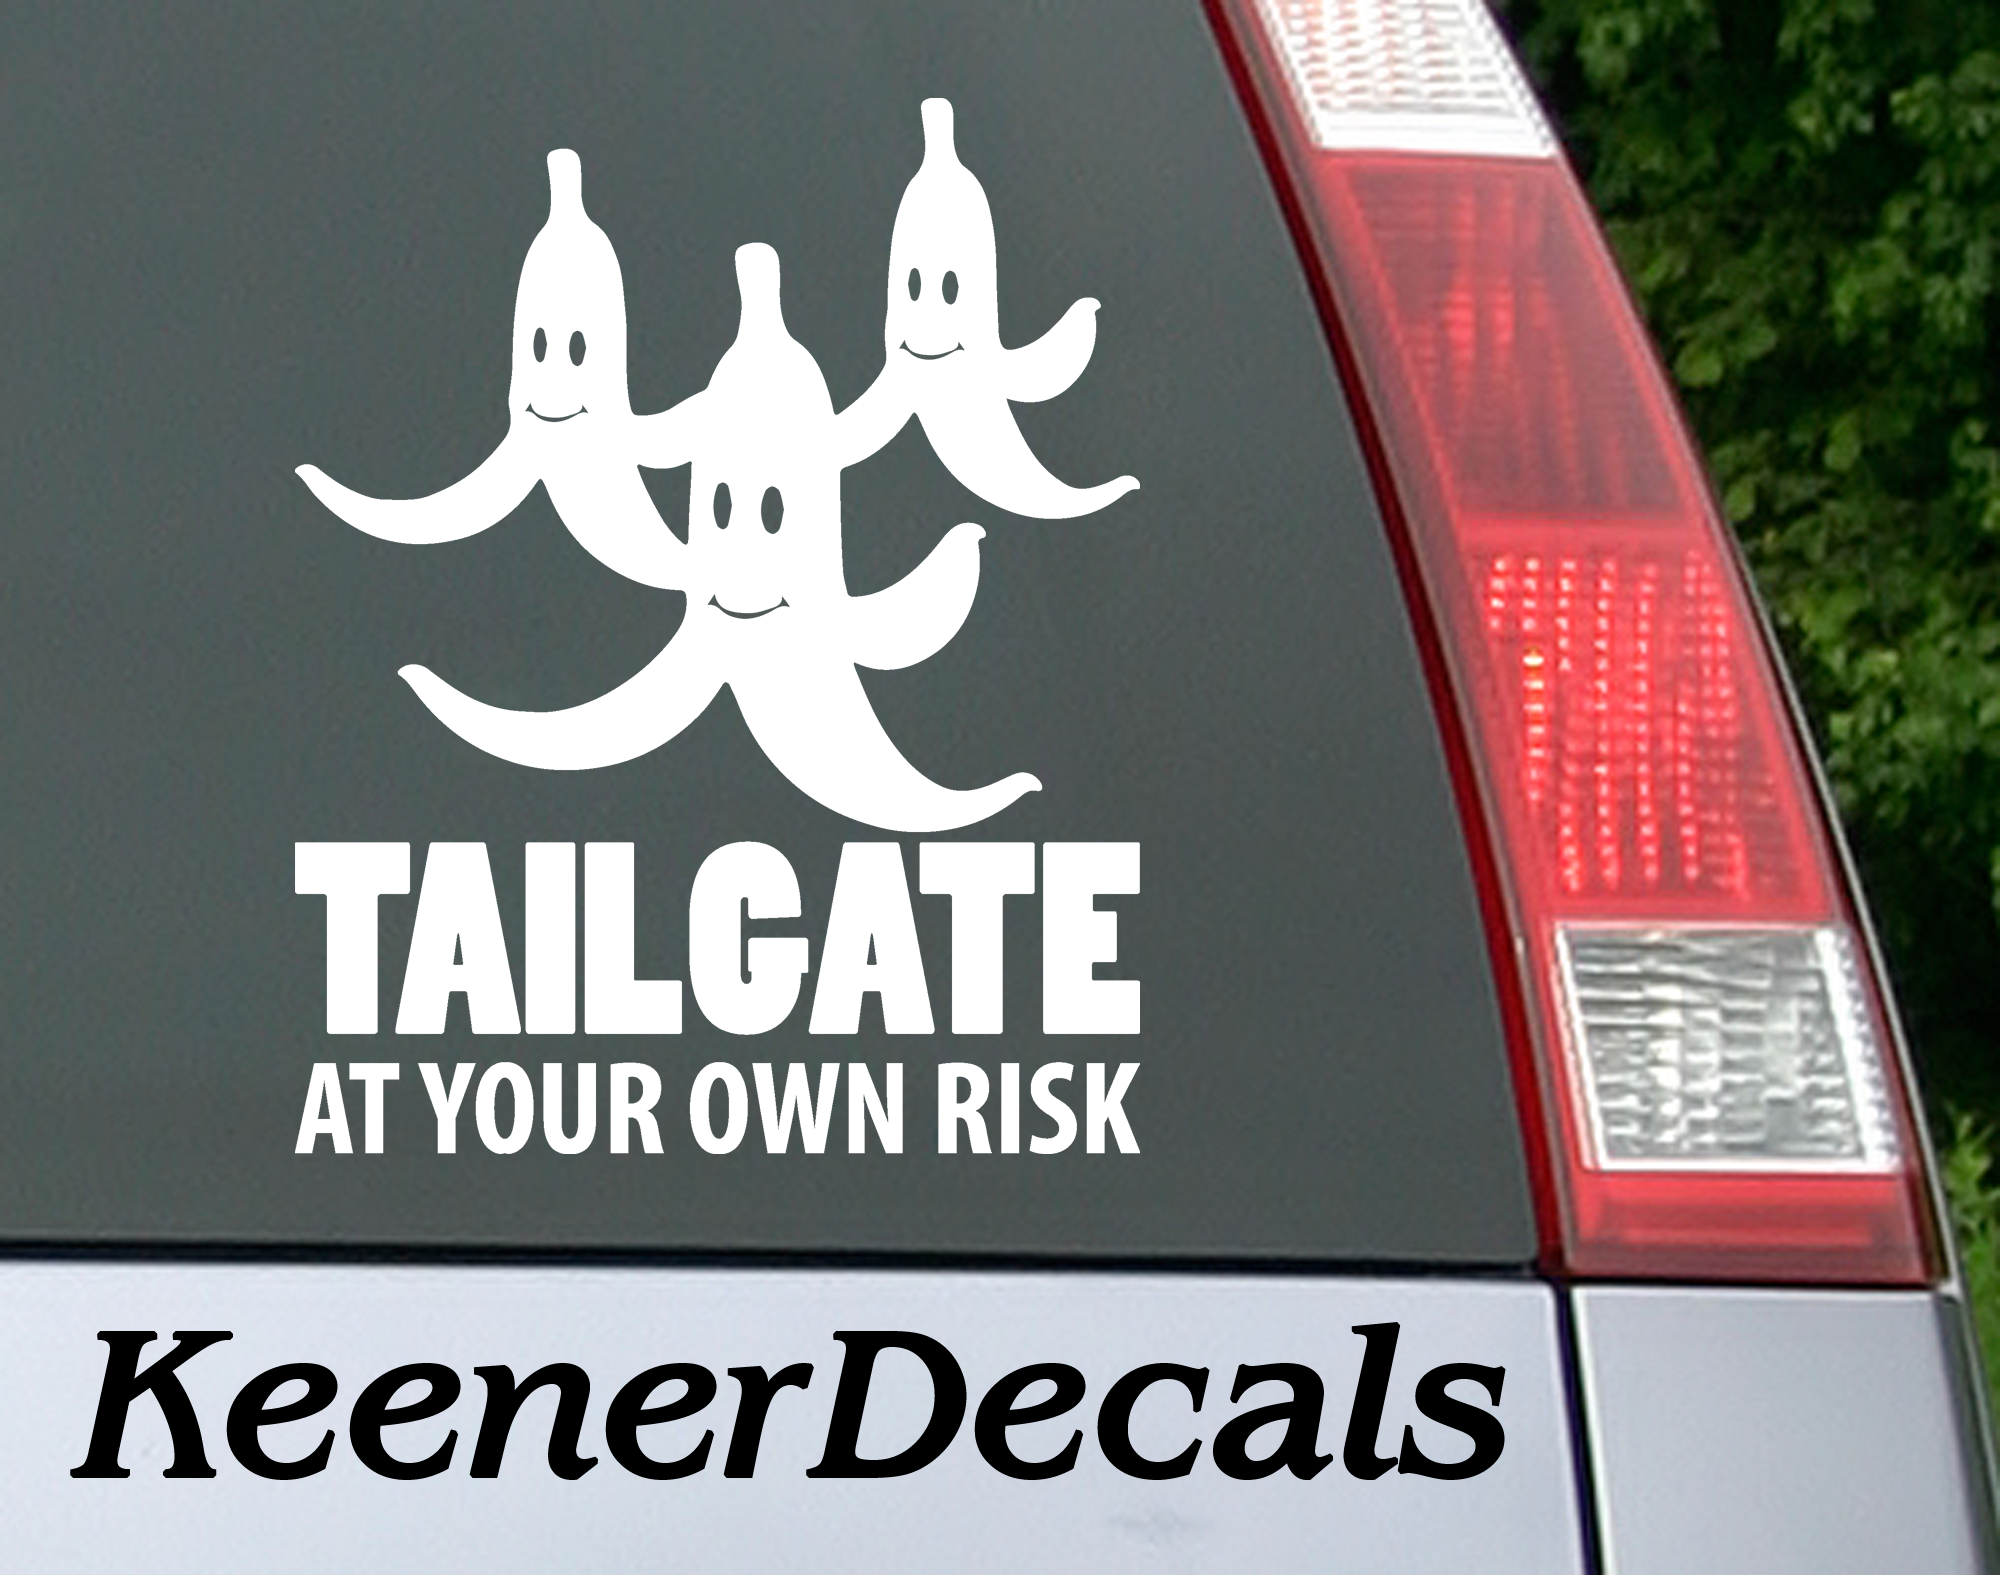 Tailgate at your own risk funny vinyl car decal. Let the drivers behind you know you don't like tailgaters with a little sarcastic humor.  5"W x 6"H Funny Car Decal, Car Sticker, Car Vinyl, Bumper Sticker, Vinyl Stickers, Vinyl Sticker. Mario Cart Nintendo